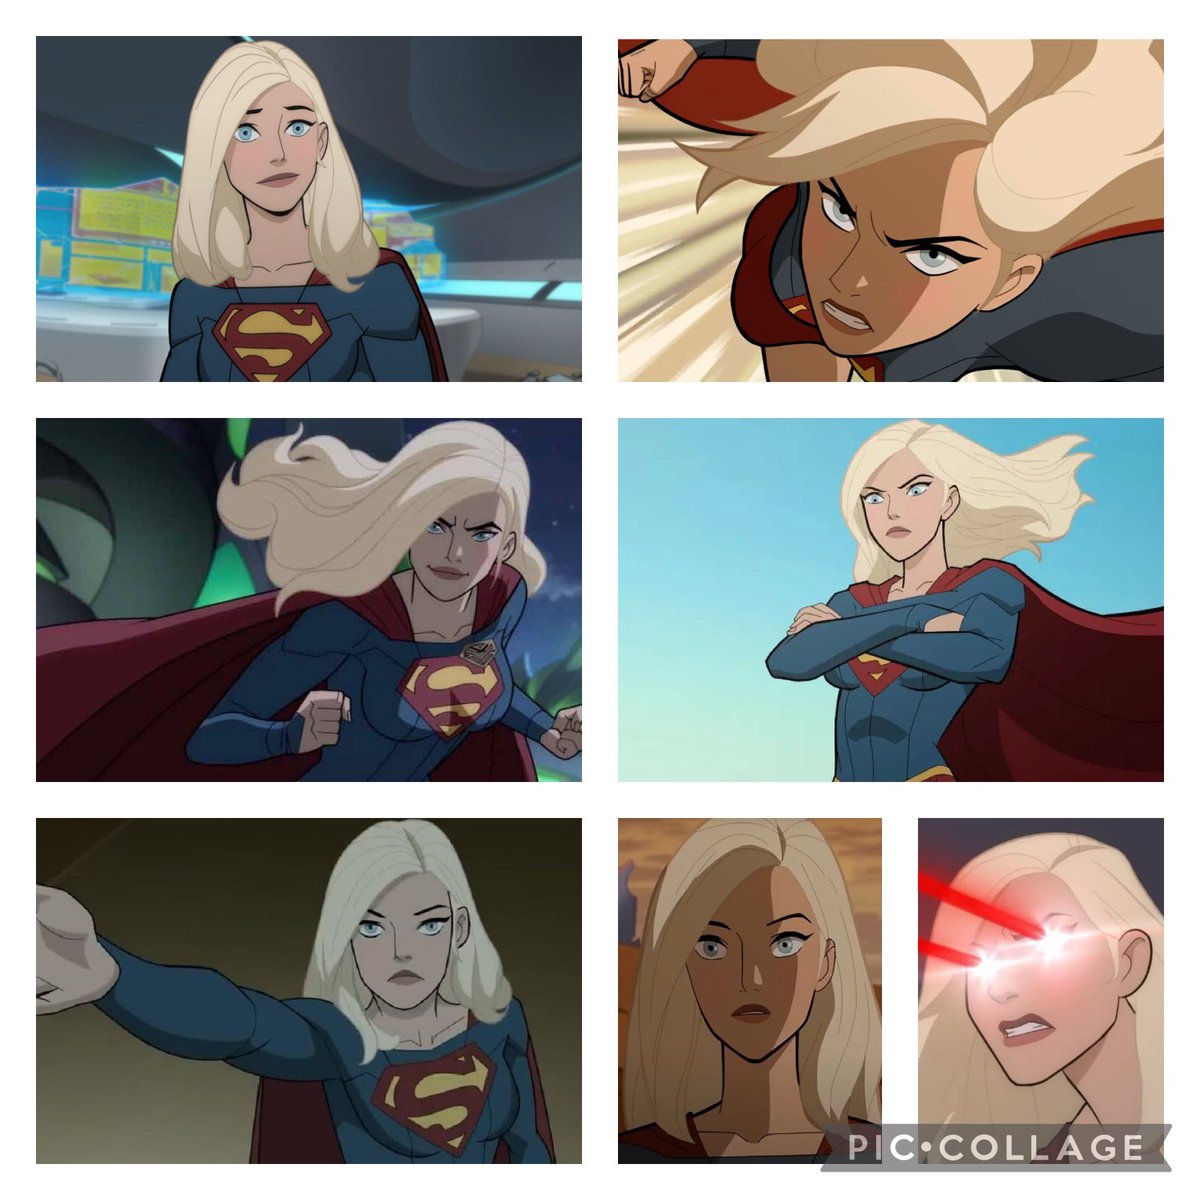 Meg Donnelly as the voice of Kara Zor-El / Supergirl in Legion of Super-Heroes (Animation film 2023) 😍 #MegDonnelly #KaraZorEl #Supergirl #LegionofSuperHeroes